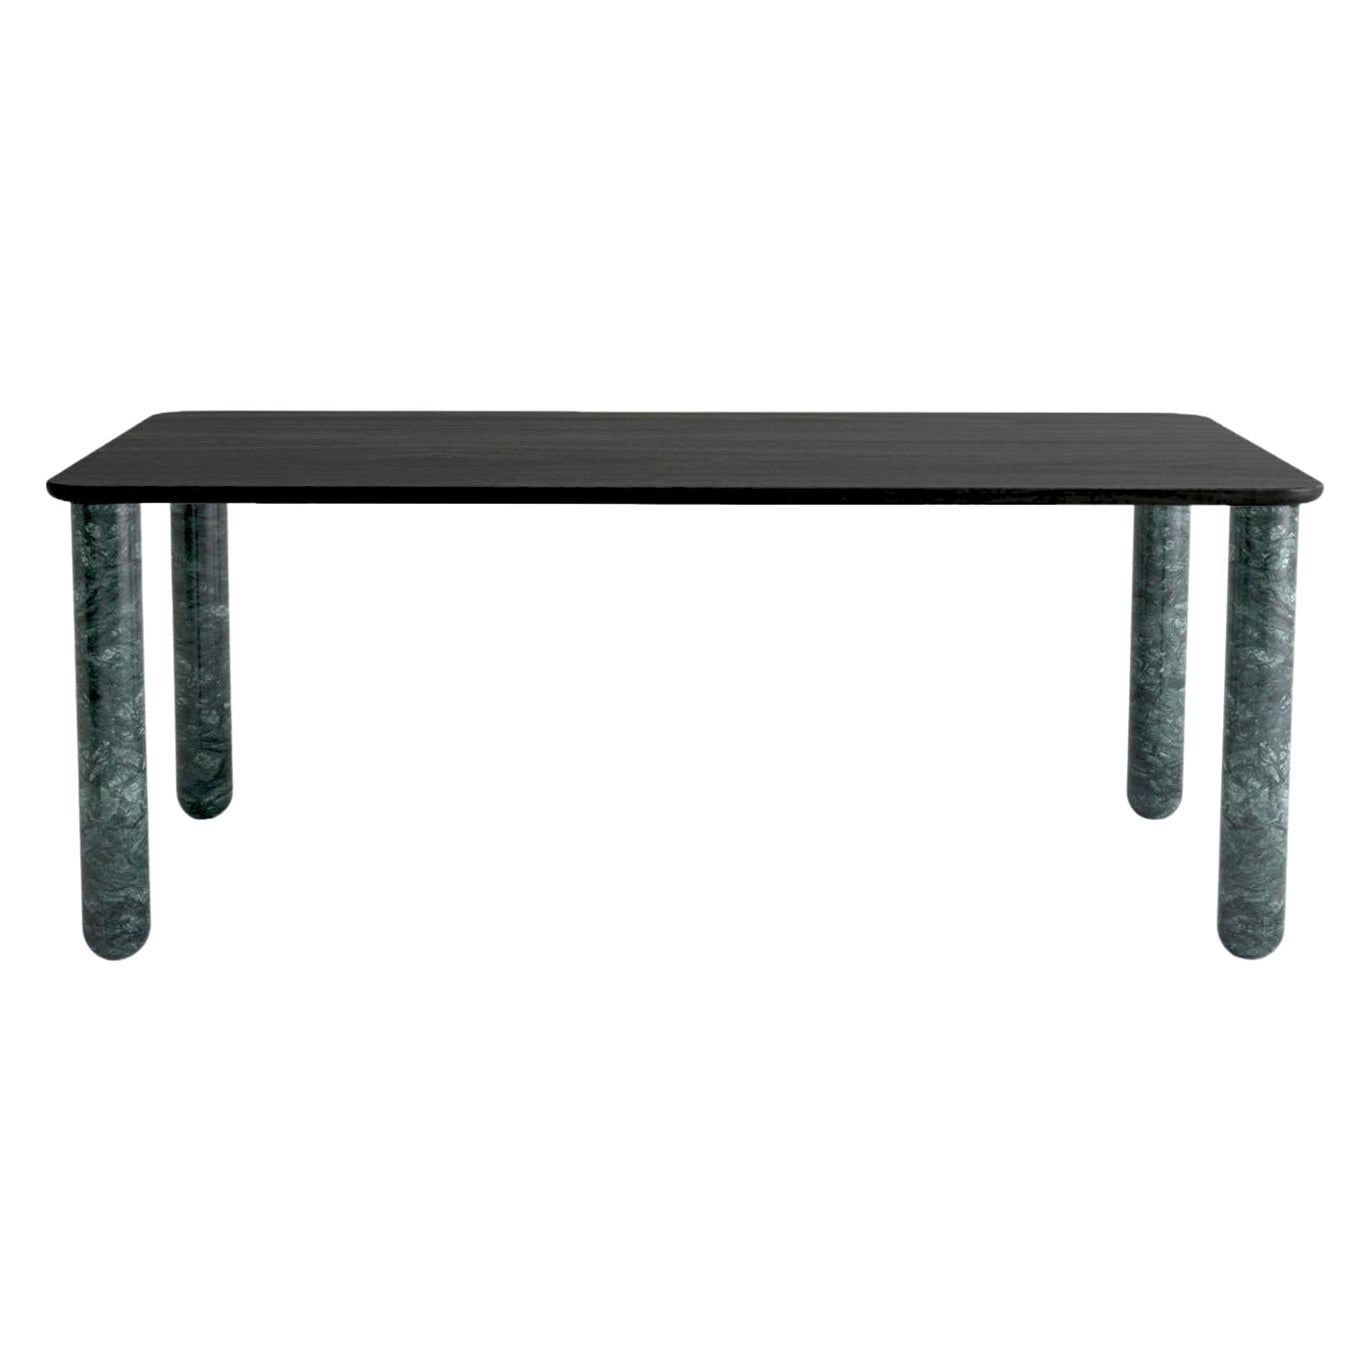 XLarge Black Wood and Green Marble "Sunday" Dining Table, Jean-Baptiste Souletie For Sale